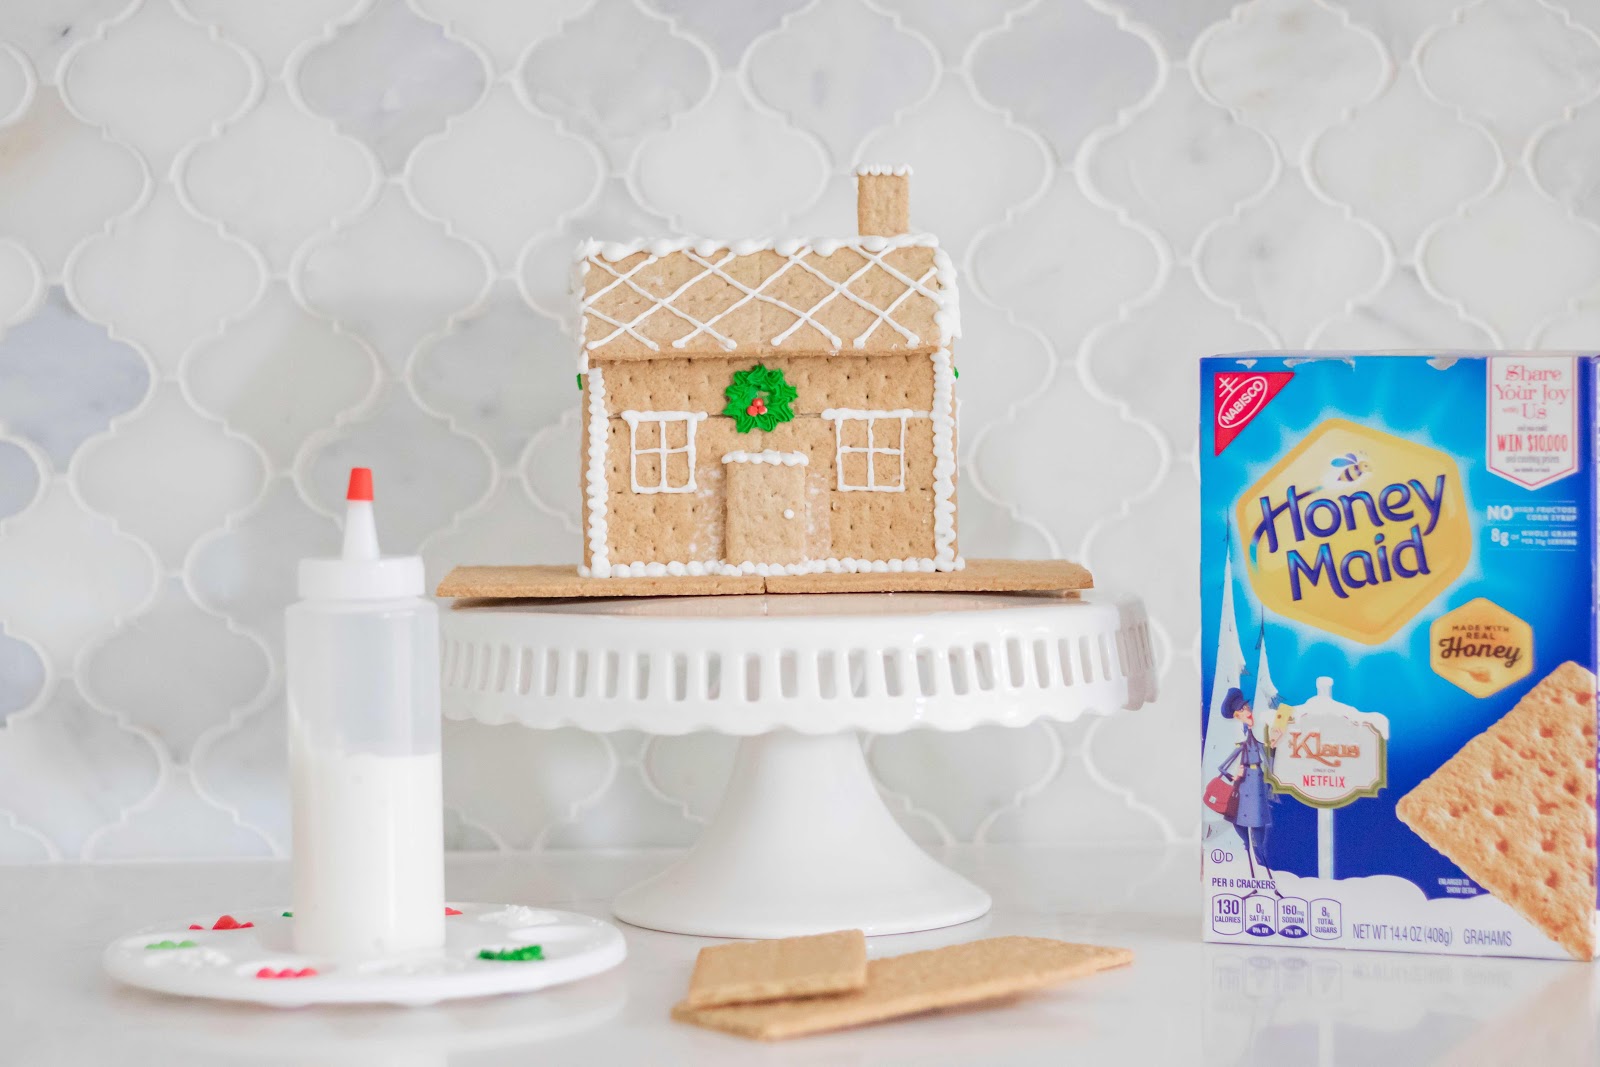 Graham Cracker Gingerbread Houses with Honey Maid!